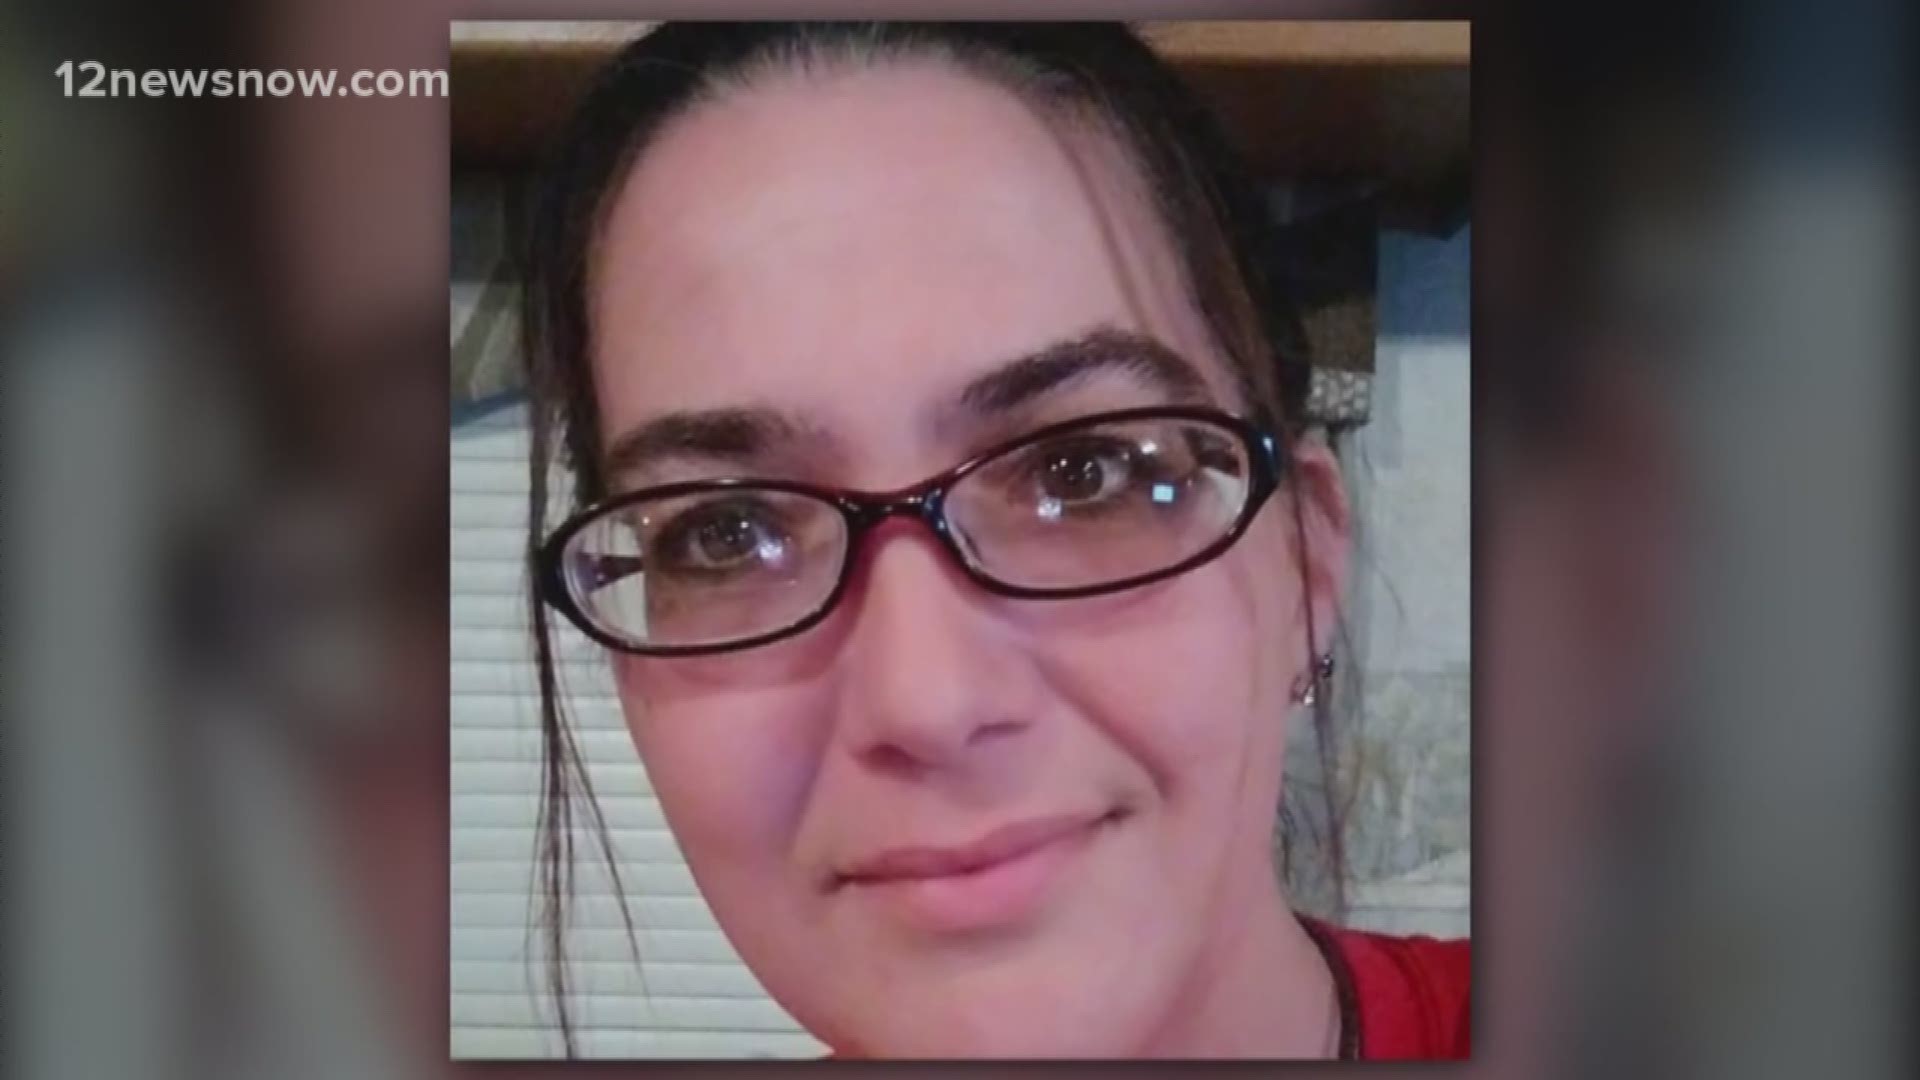 Her body was found in the Sabine River less than 24 hours after she was reported missing.